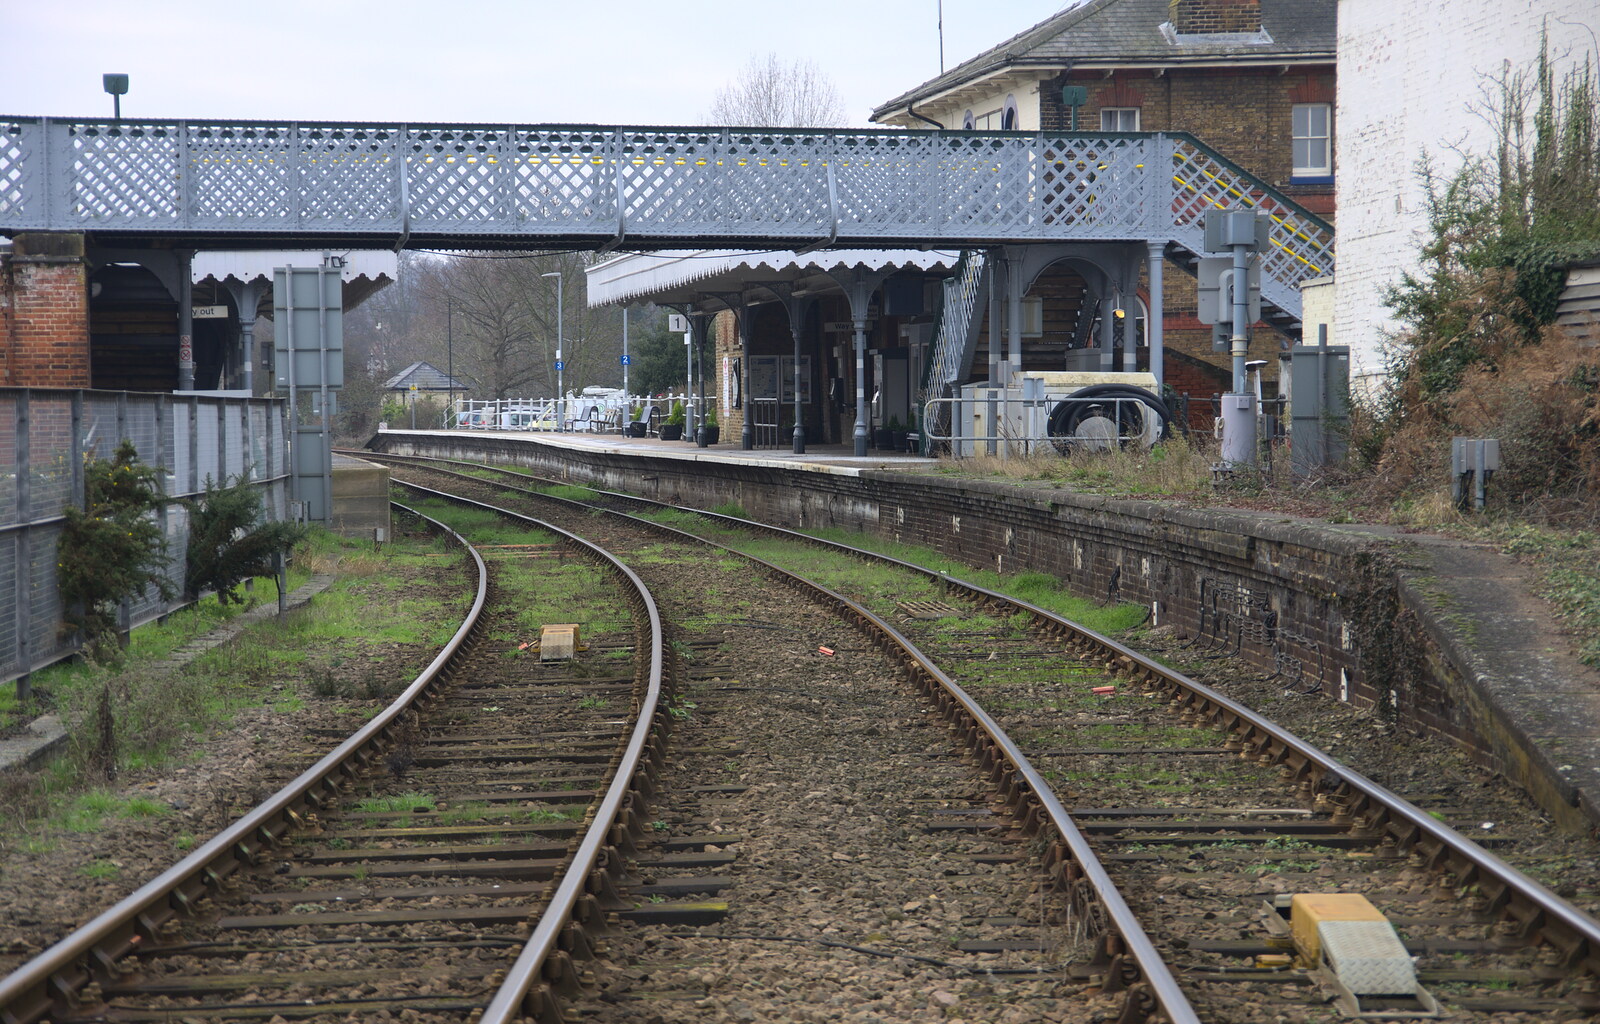 The railway station doesn't look too active from A Postcard From Woodbridge, Suffolk - 4th January 2019